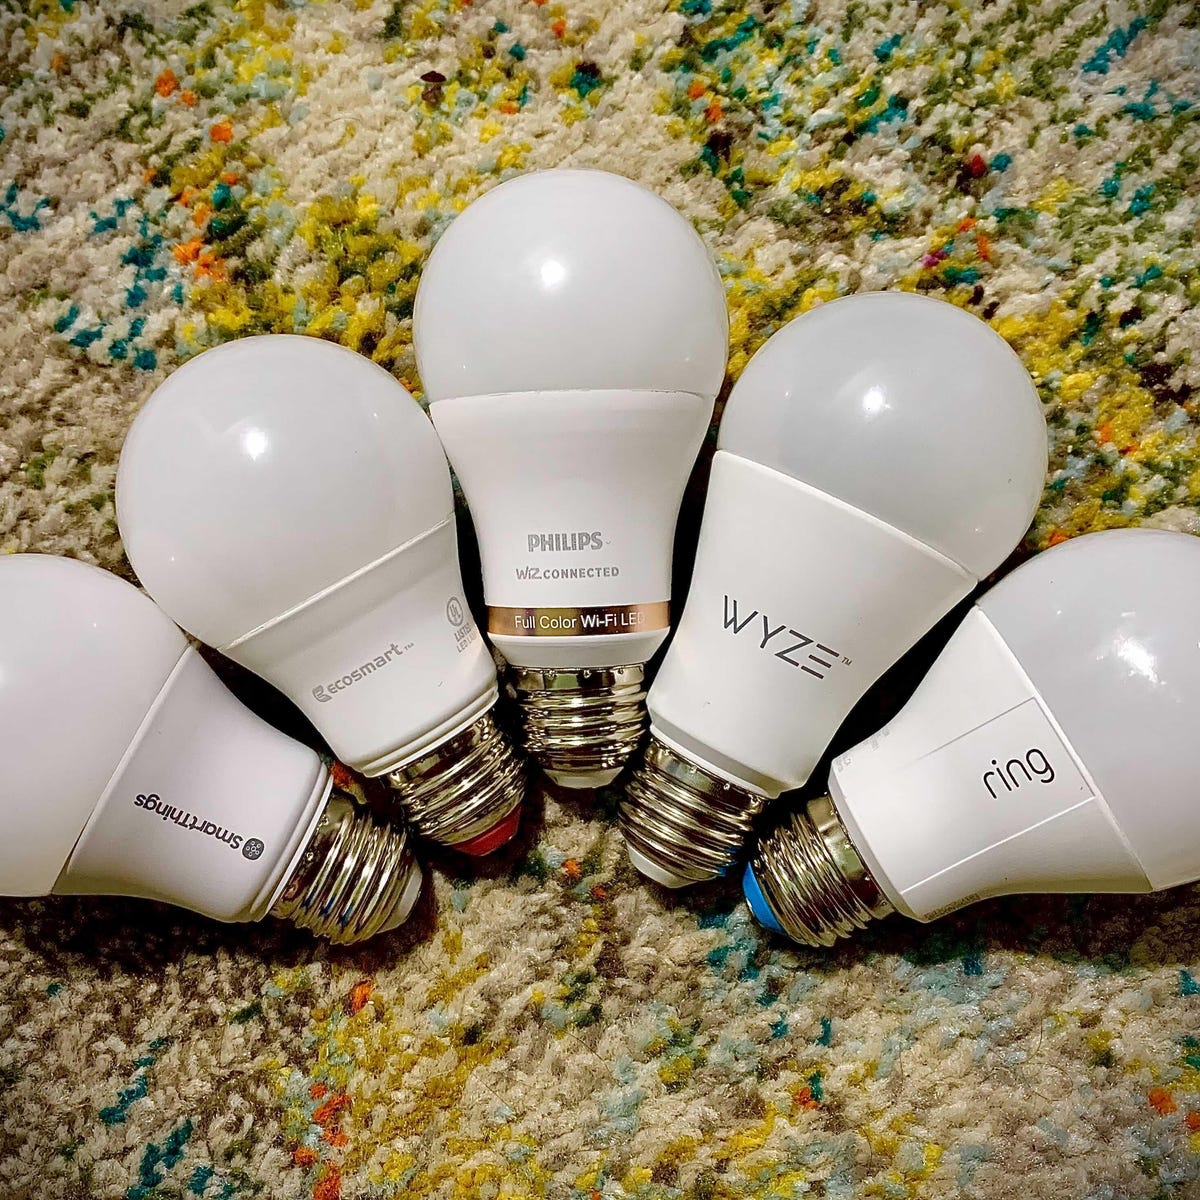 The Best Smart Bulbs for Less Than $20: Wiz, Wyze, Cree, GE and More - CNET